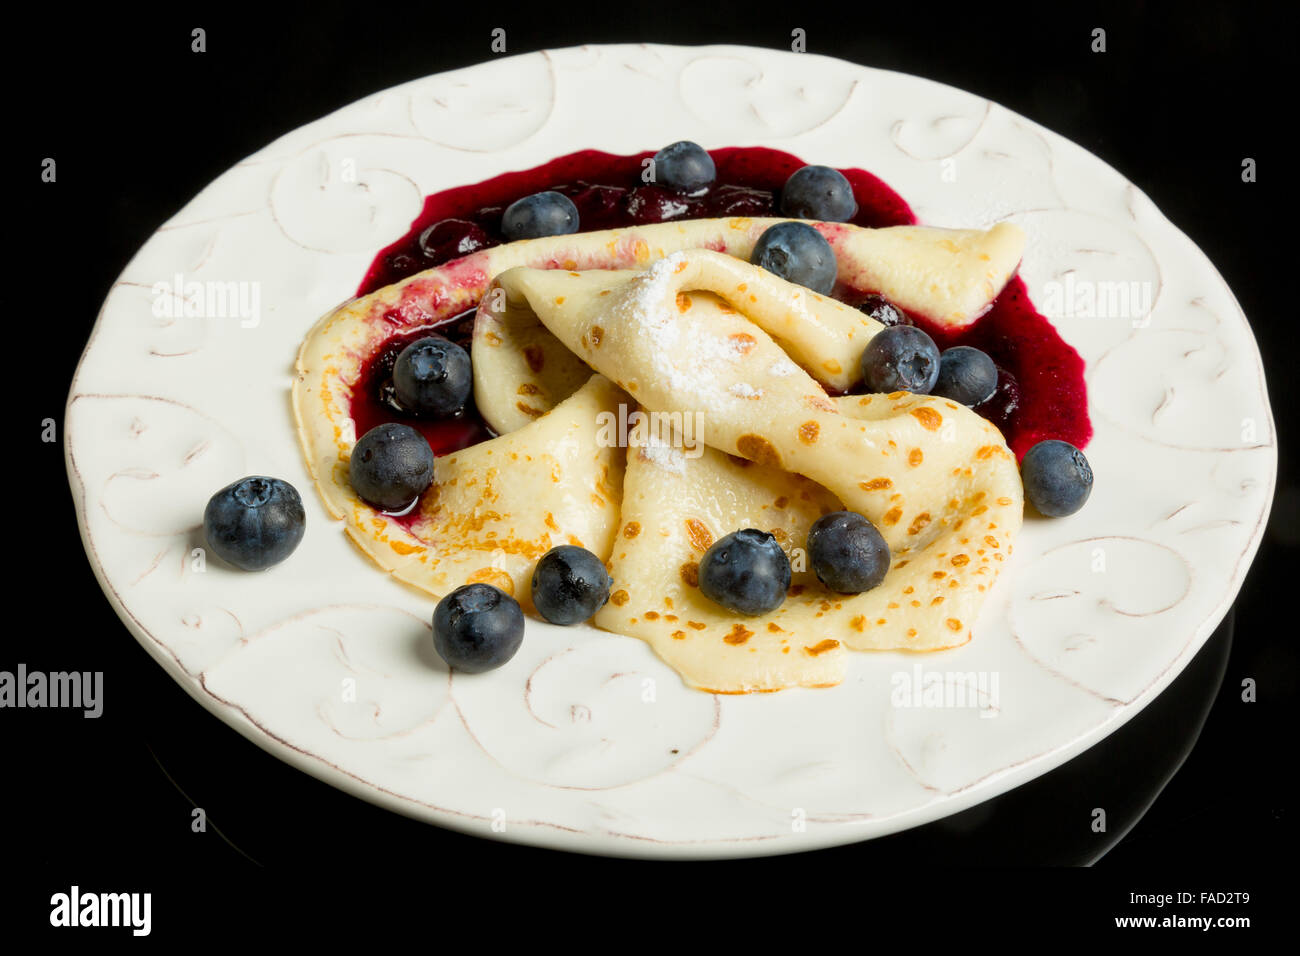 Small dessert. Pancake with blueberry sauce and blueberries. Stock Photo